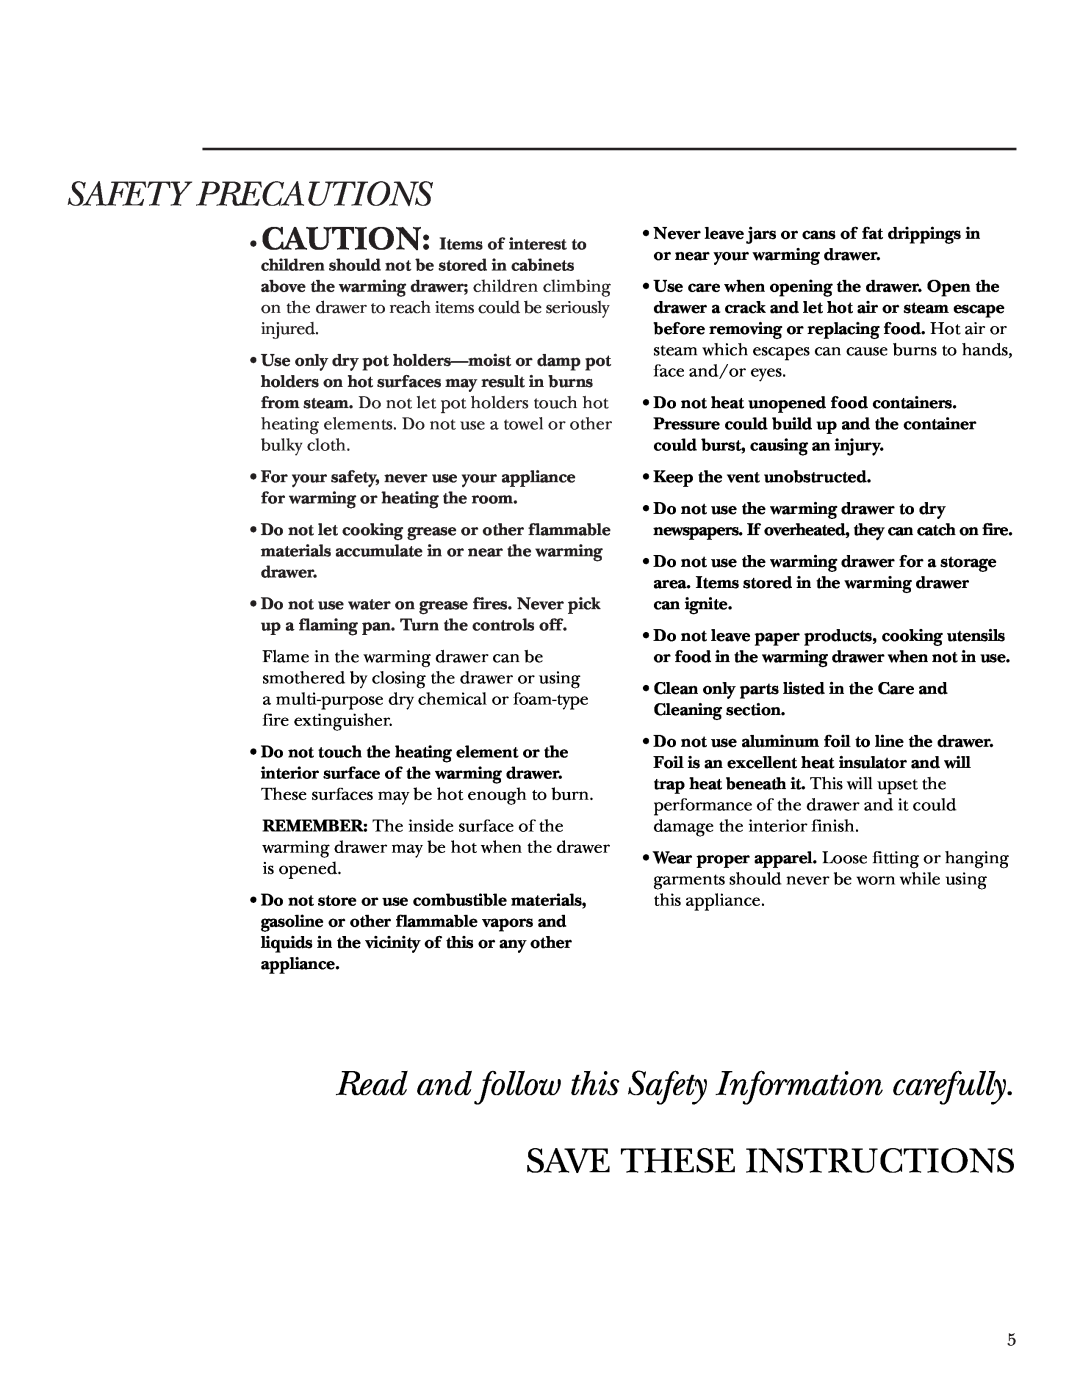 GE ZKD910 owner manual Read and follow this Safety Information carefully, Save These Instructions, Safety Precautions 